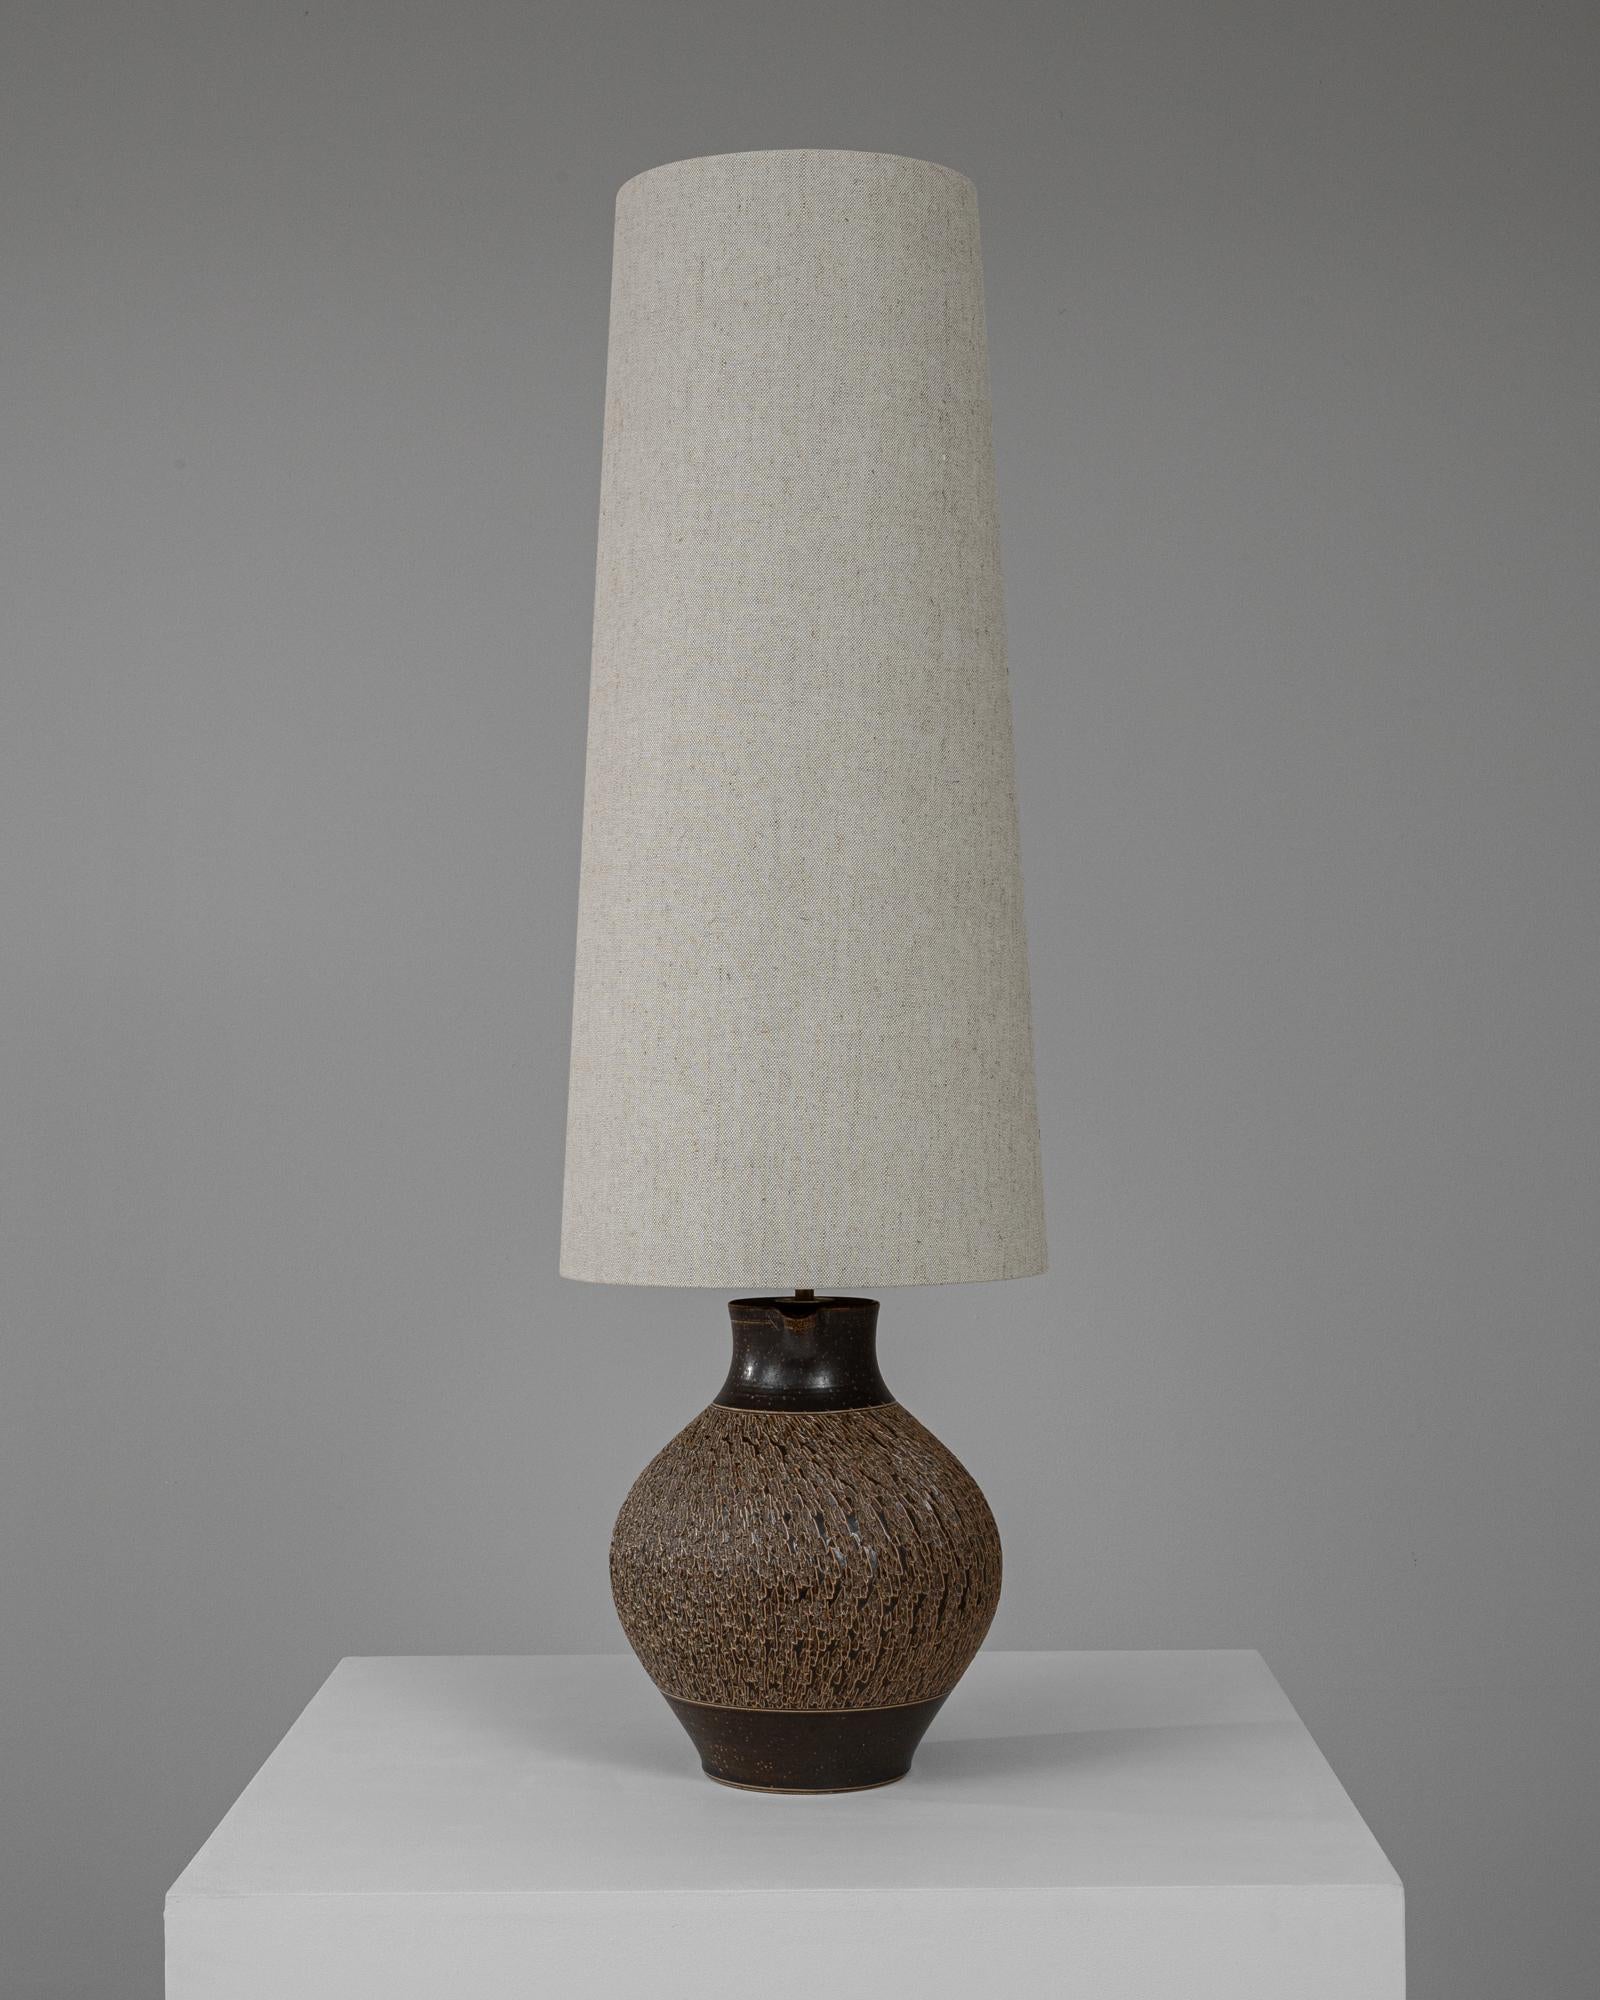 This charming 20th Century German ceramic table lamp offers a blend of rustic allure and functional design, making it a delightful addition to any room. The lamp's base is crafted from ceramic with a rough, textured finish and a deep brown hue that